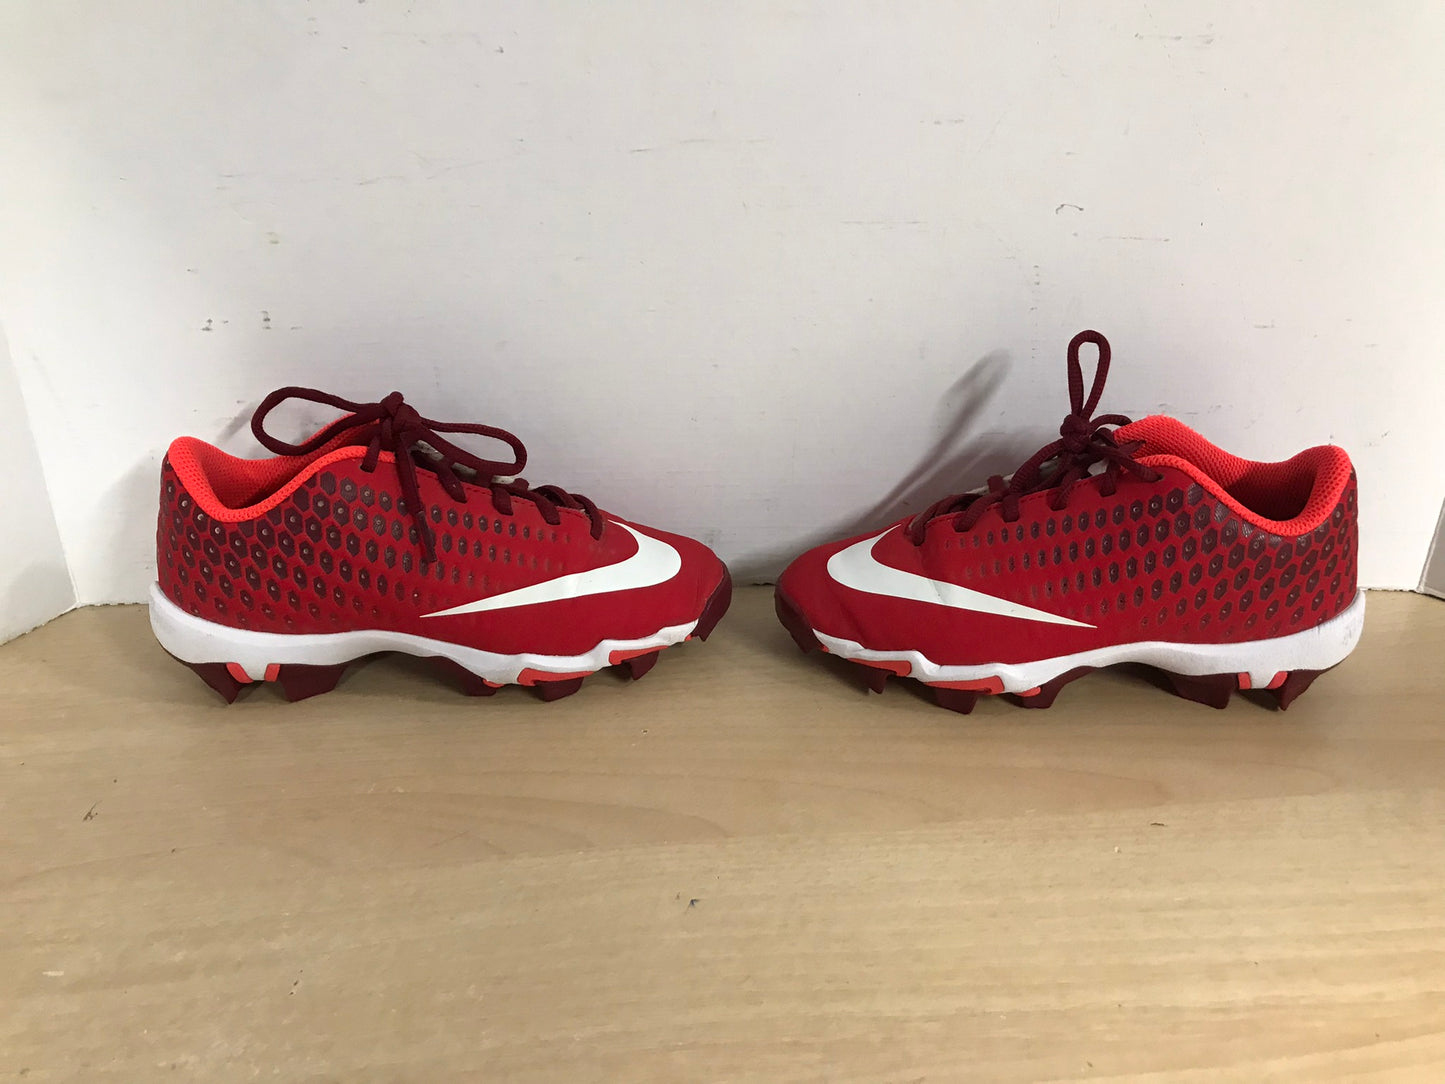 Baseball Shoes Cleats Child Size 2 Nike Red White Excellent